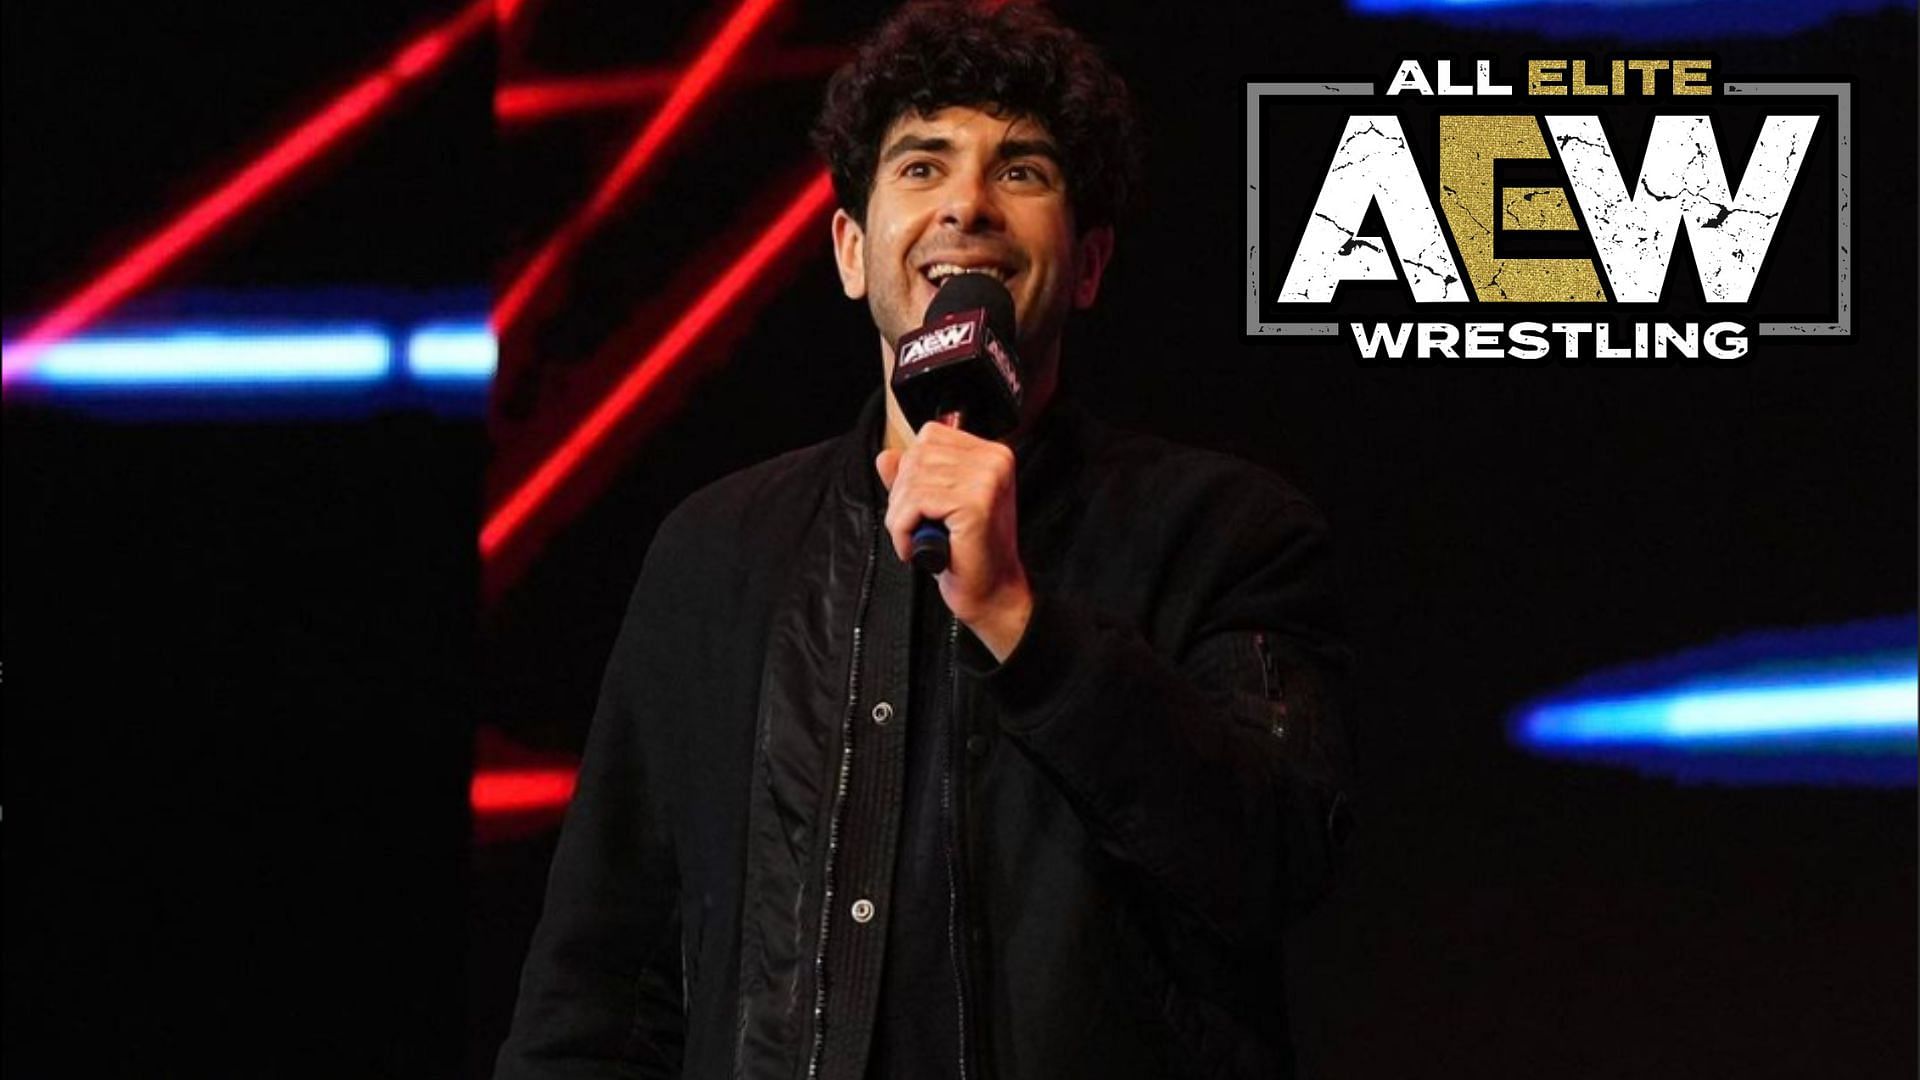 Tony Khan recently signed a new star to AEW!